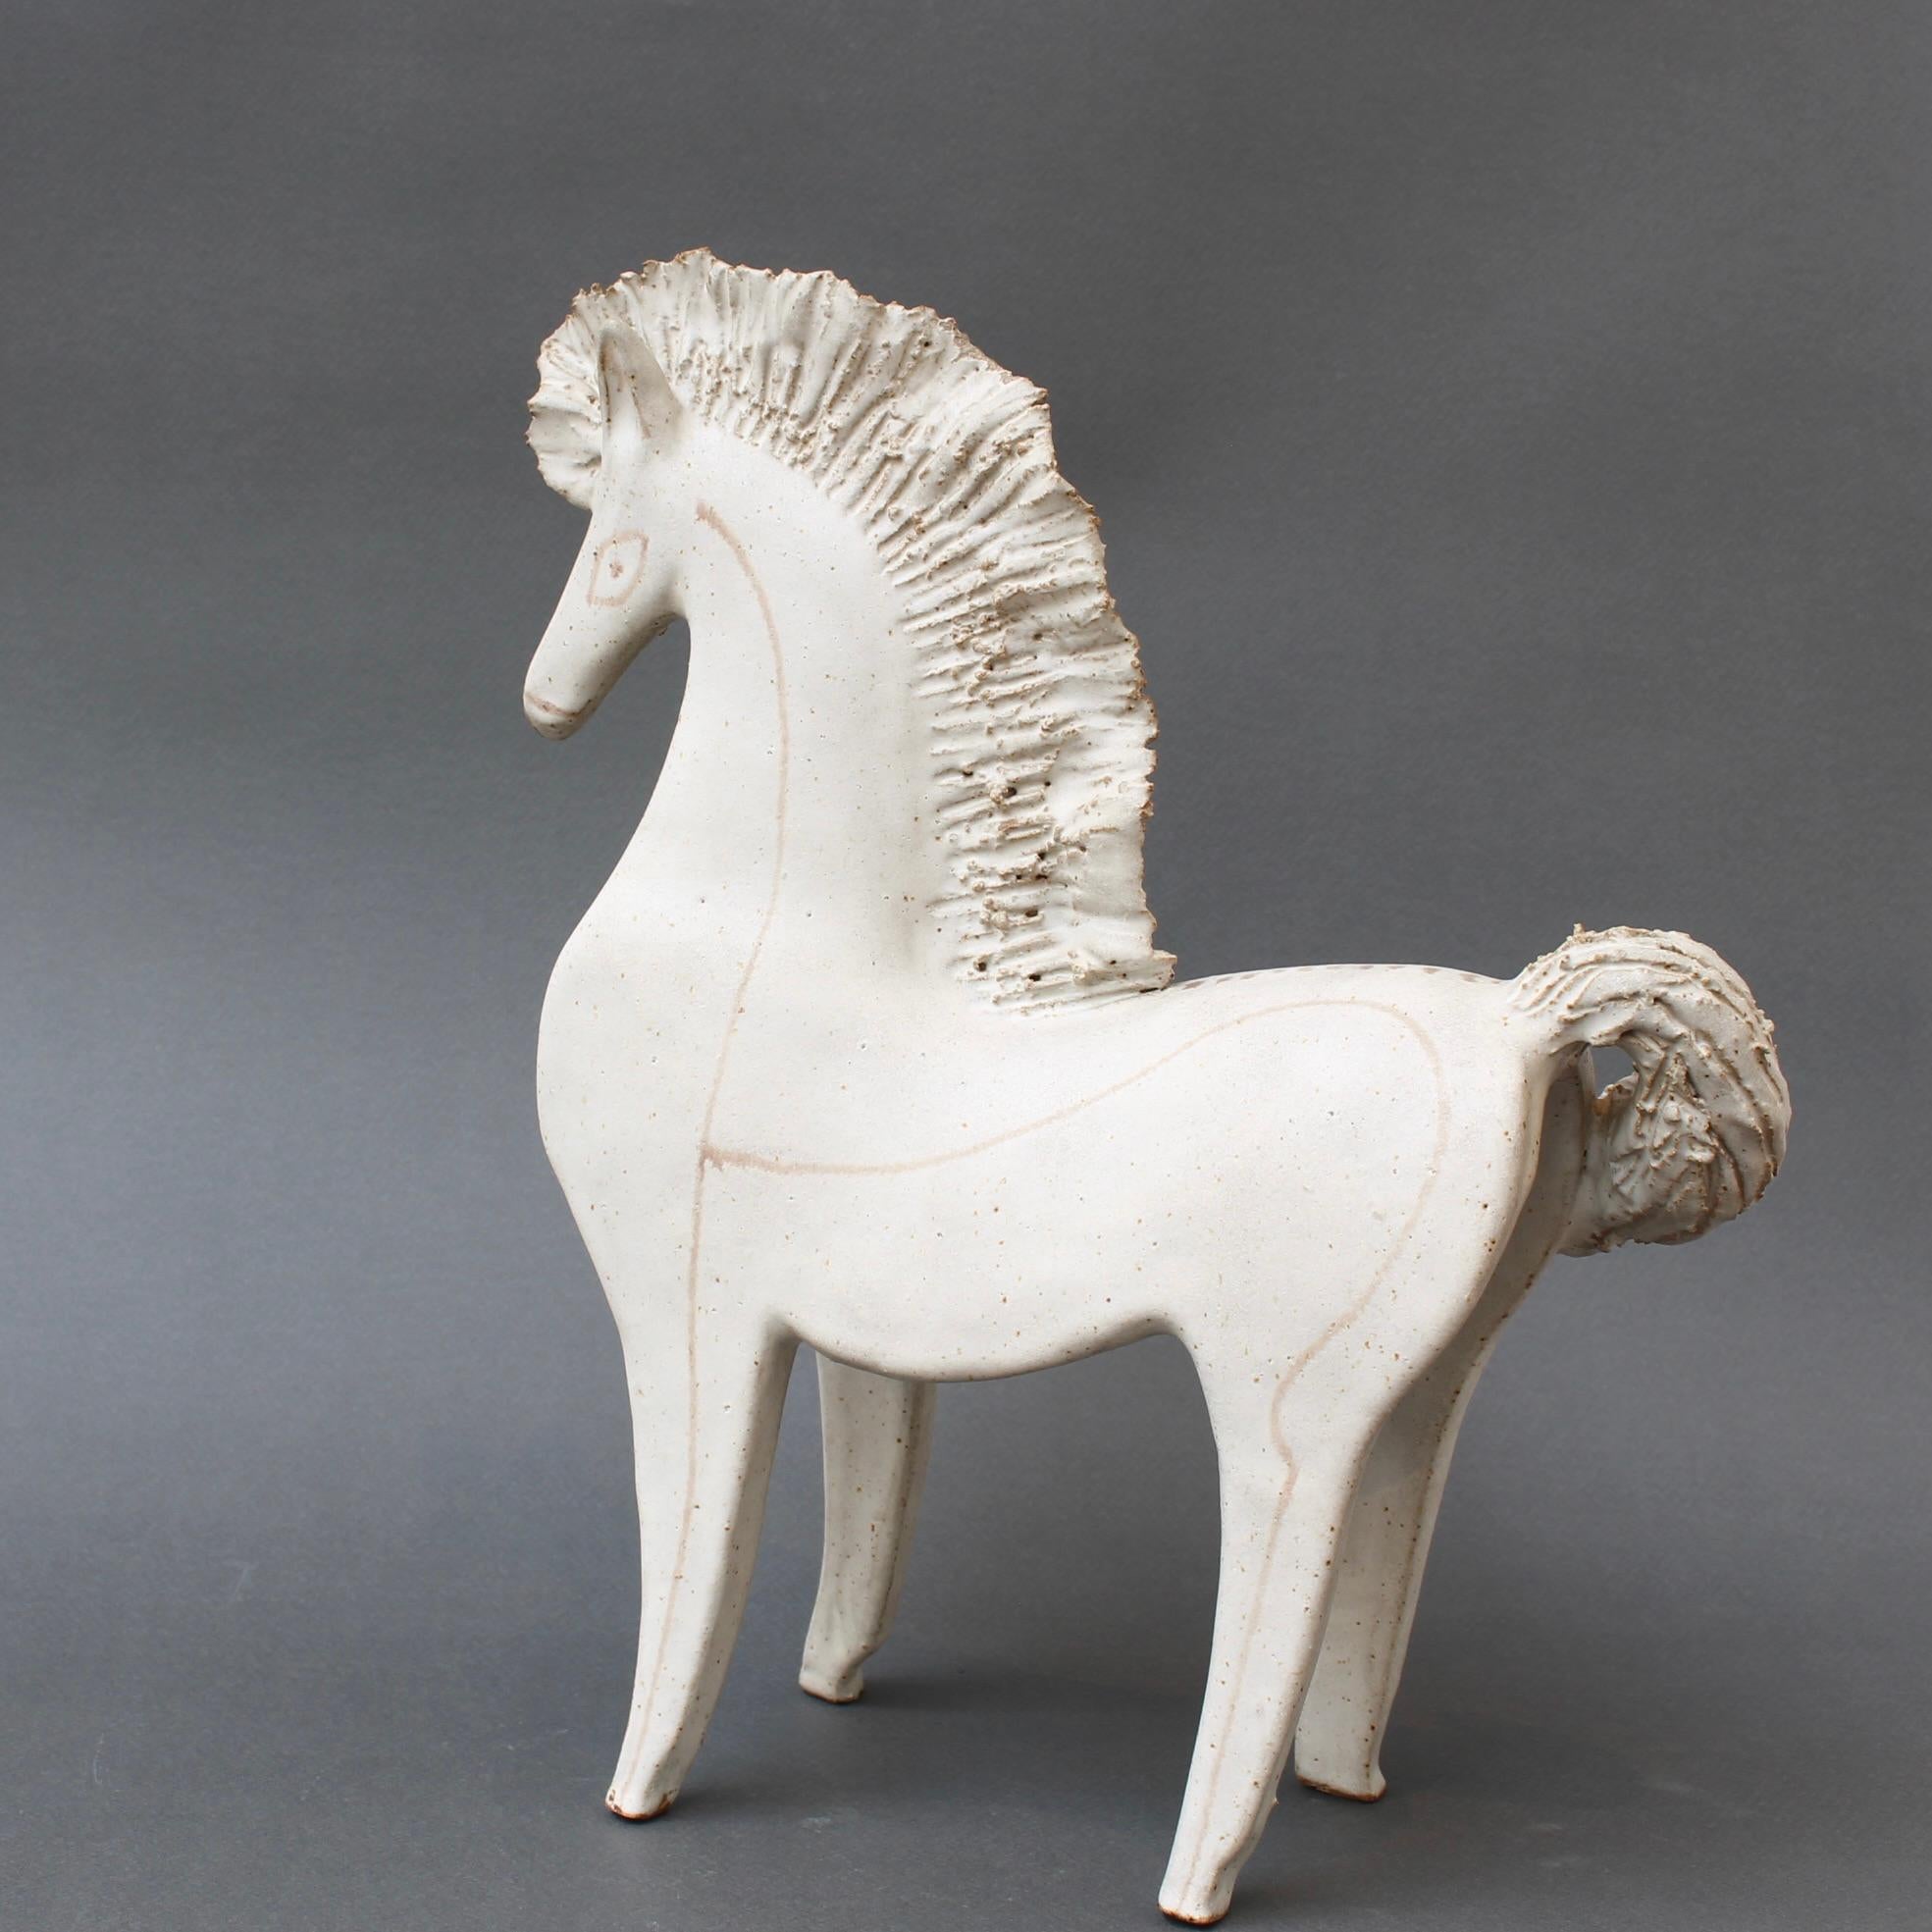 Vintage Ceramic Horse by Bruno Gambone (circa 1970s) - Large For Sale 4